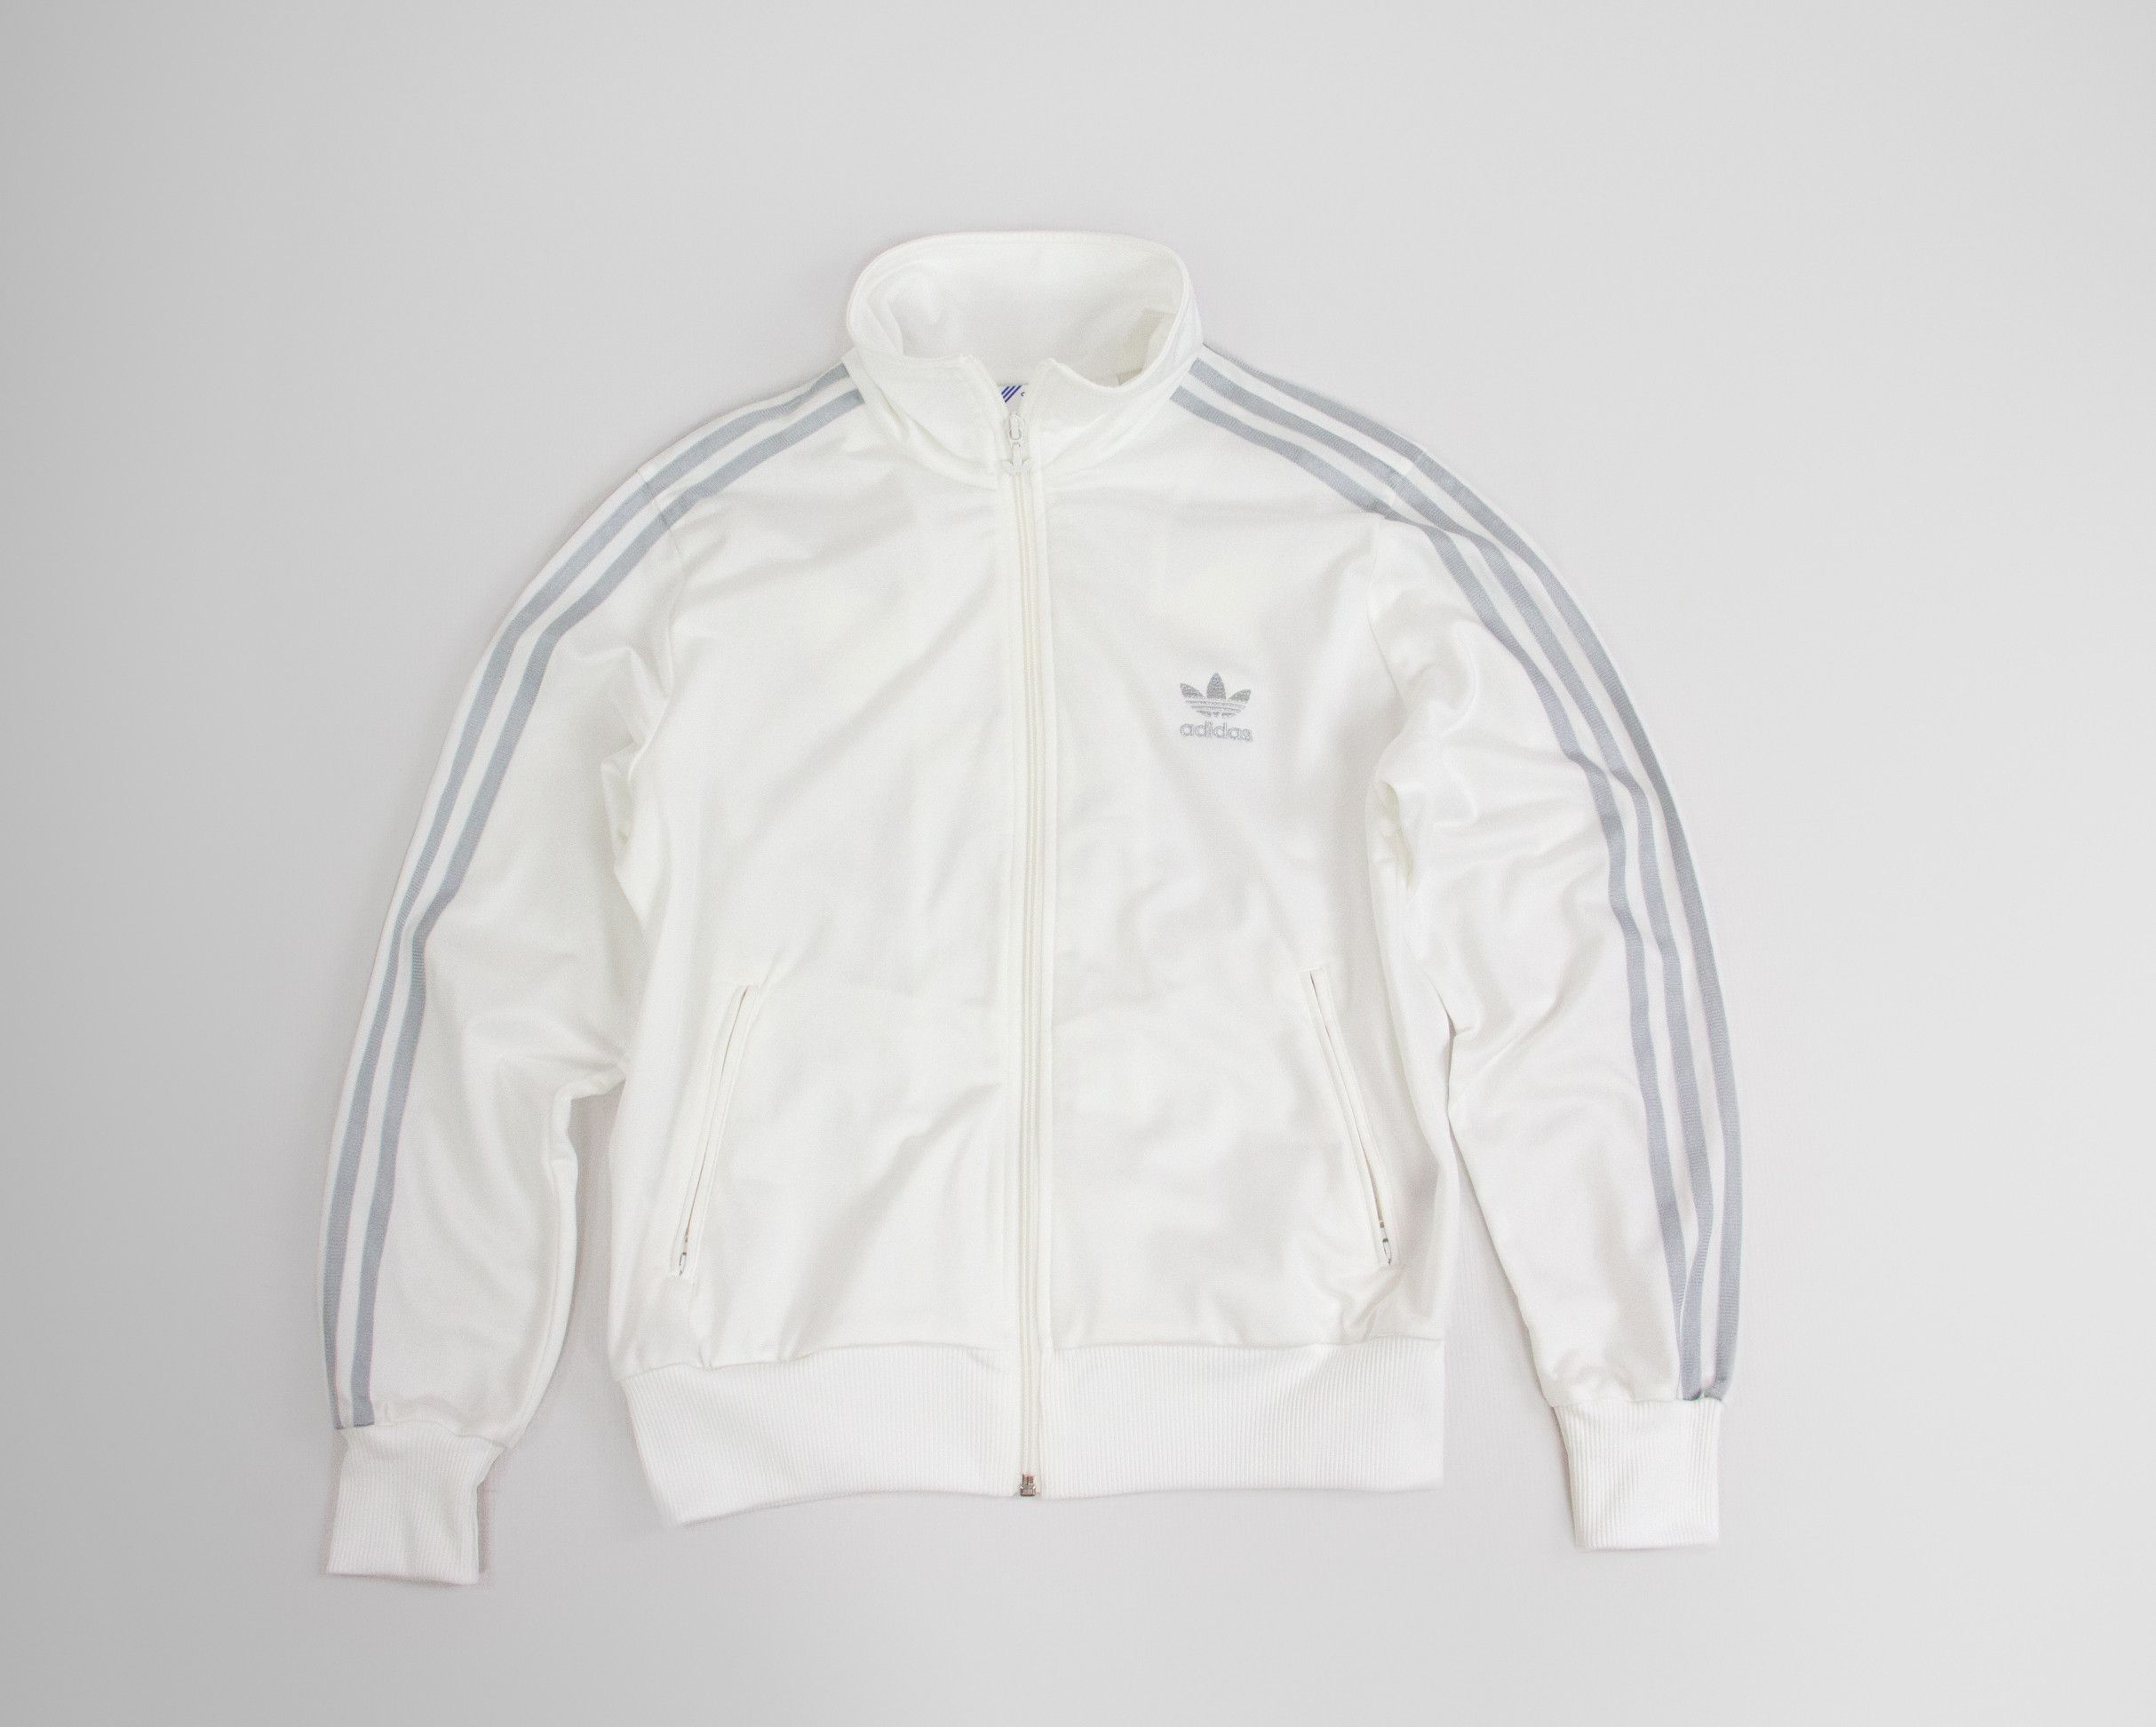 Adidas Adidas Originals White Track Jacket with Silver Stripes, Size M Size US M / EU 48-50 / 2 - 1 Preview